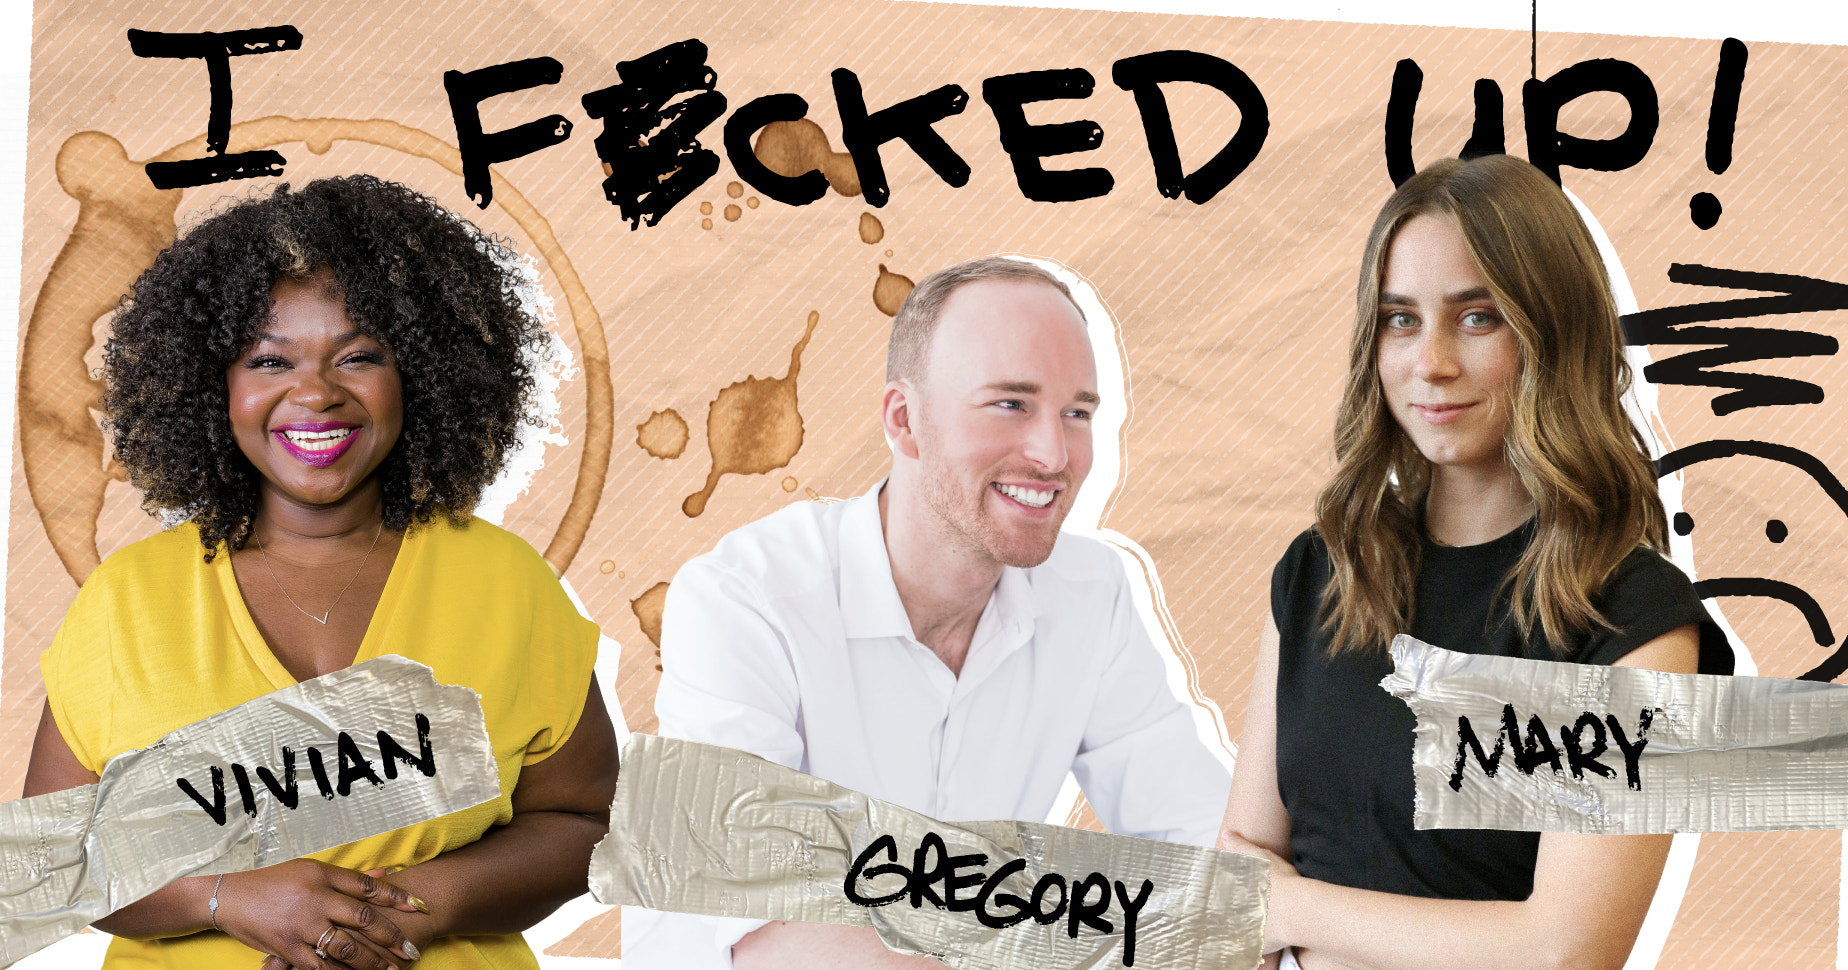 Three entrepreneurs, Vivian, Gregory, and Mary, pictured with "I F*cked Up" text